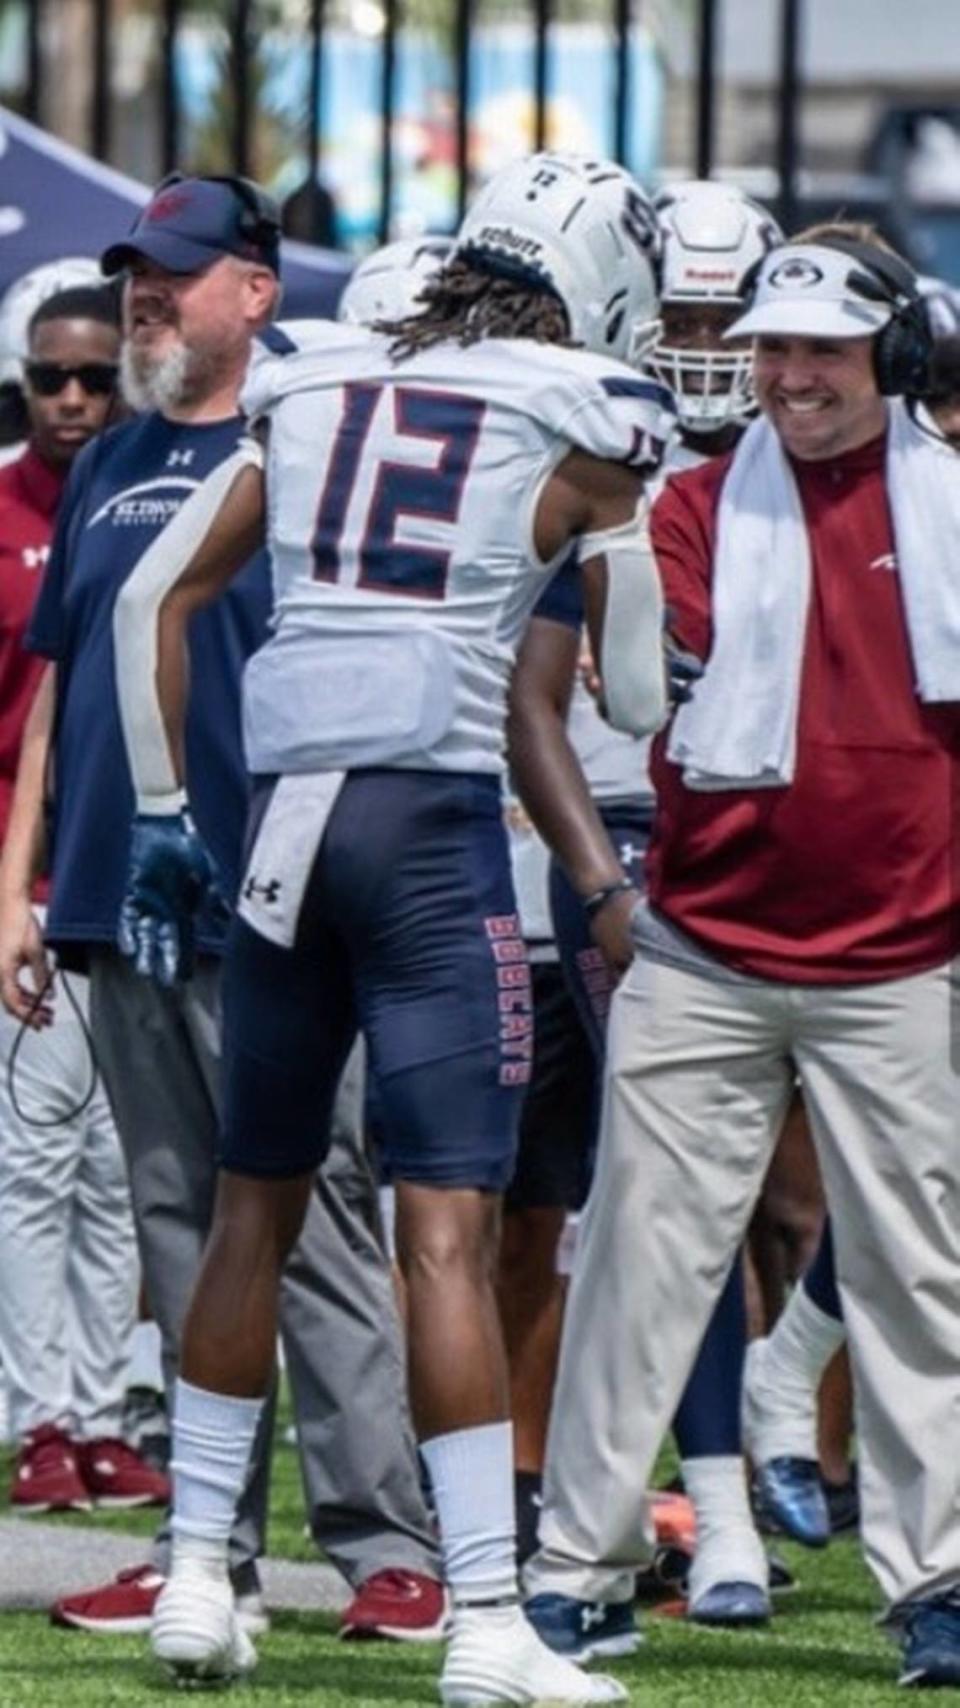 Drew Davis, assistant coach at St. Thomas University and son of former University of Miami and FIU football coach Butch Davis, greets one of his players during a game.